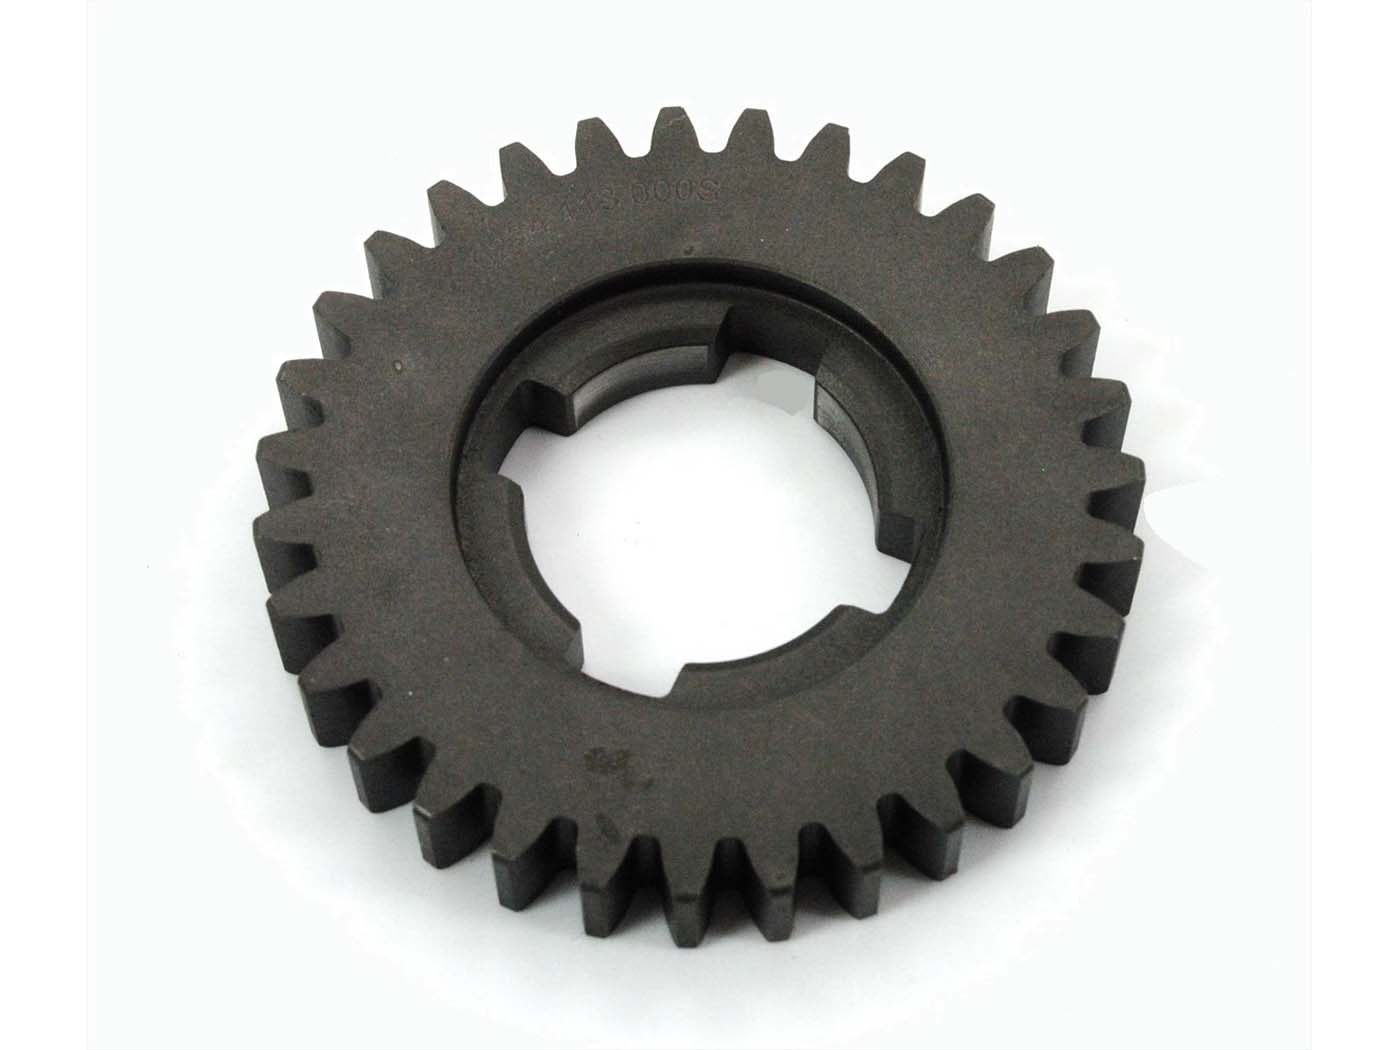 Idler Wheel 31 Teeth For 4-speed Gearbox Large Shift Wheel For Hercules Miele DKW Sachs 50/4 Engine